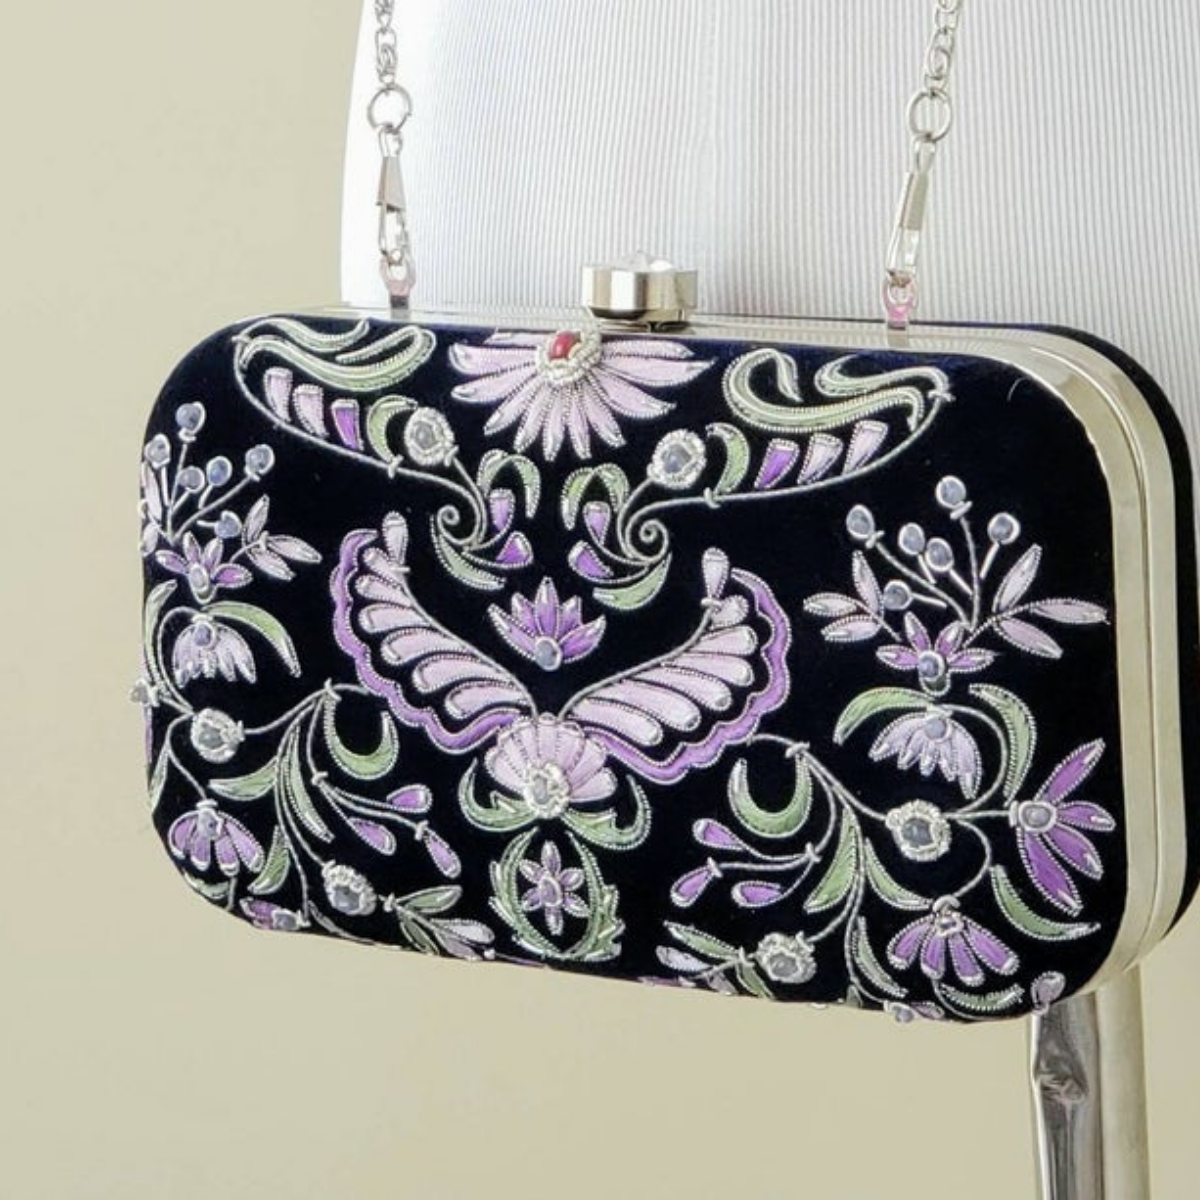 Luxury evening bag in navy velvet with lavender purple flowers and inlaid with semi precious stones, jewel purse. 